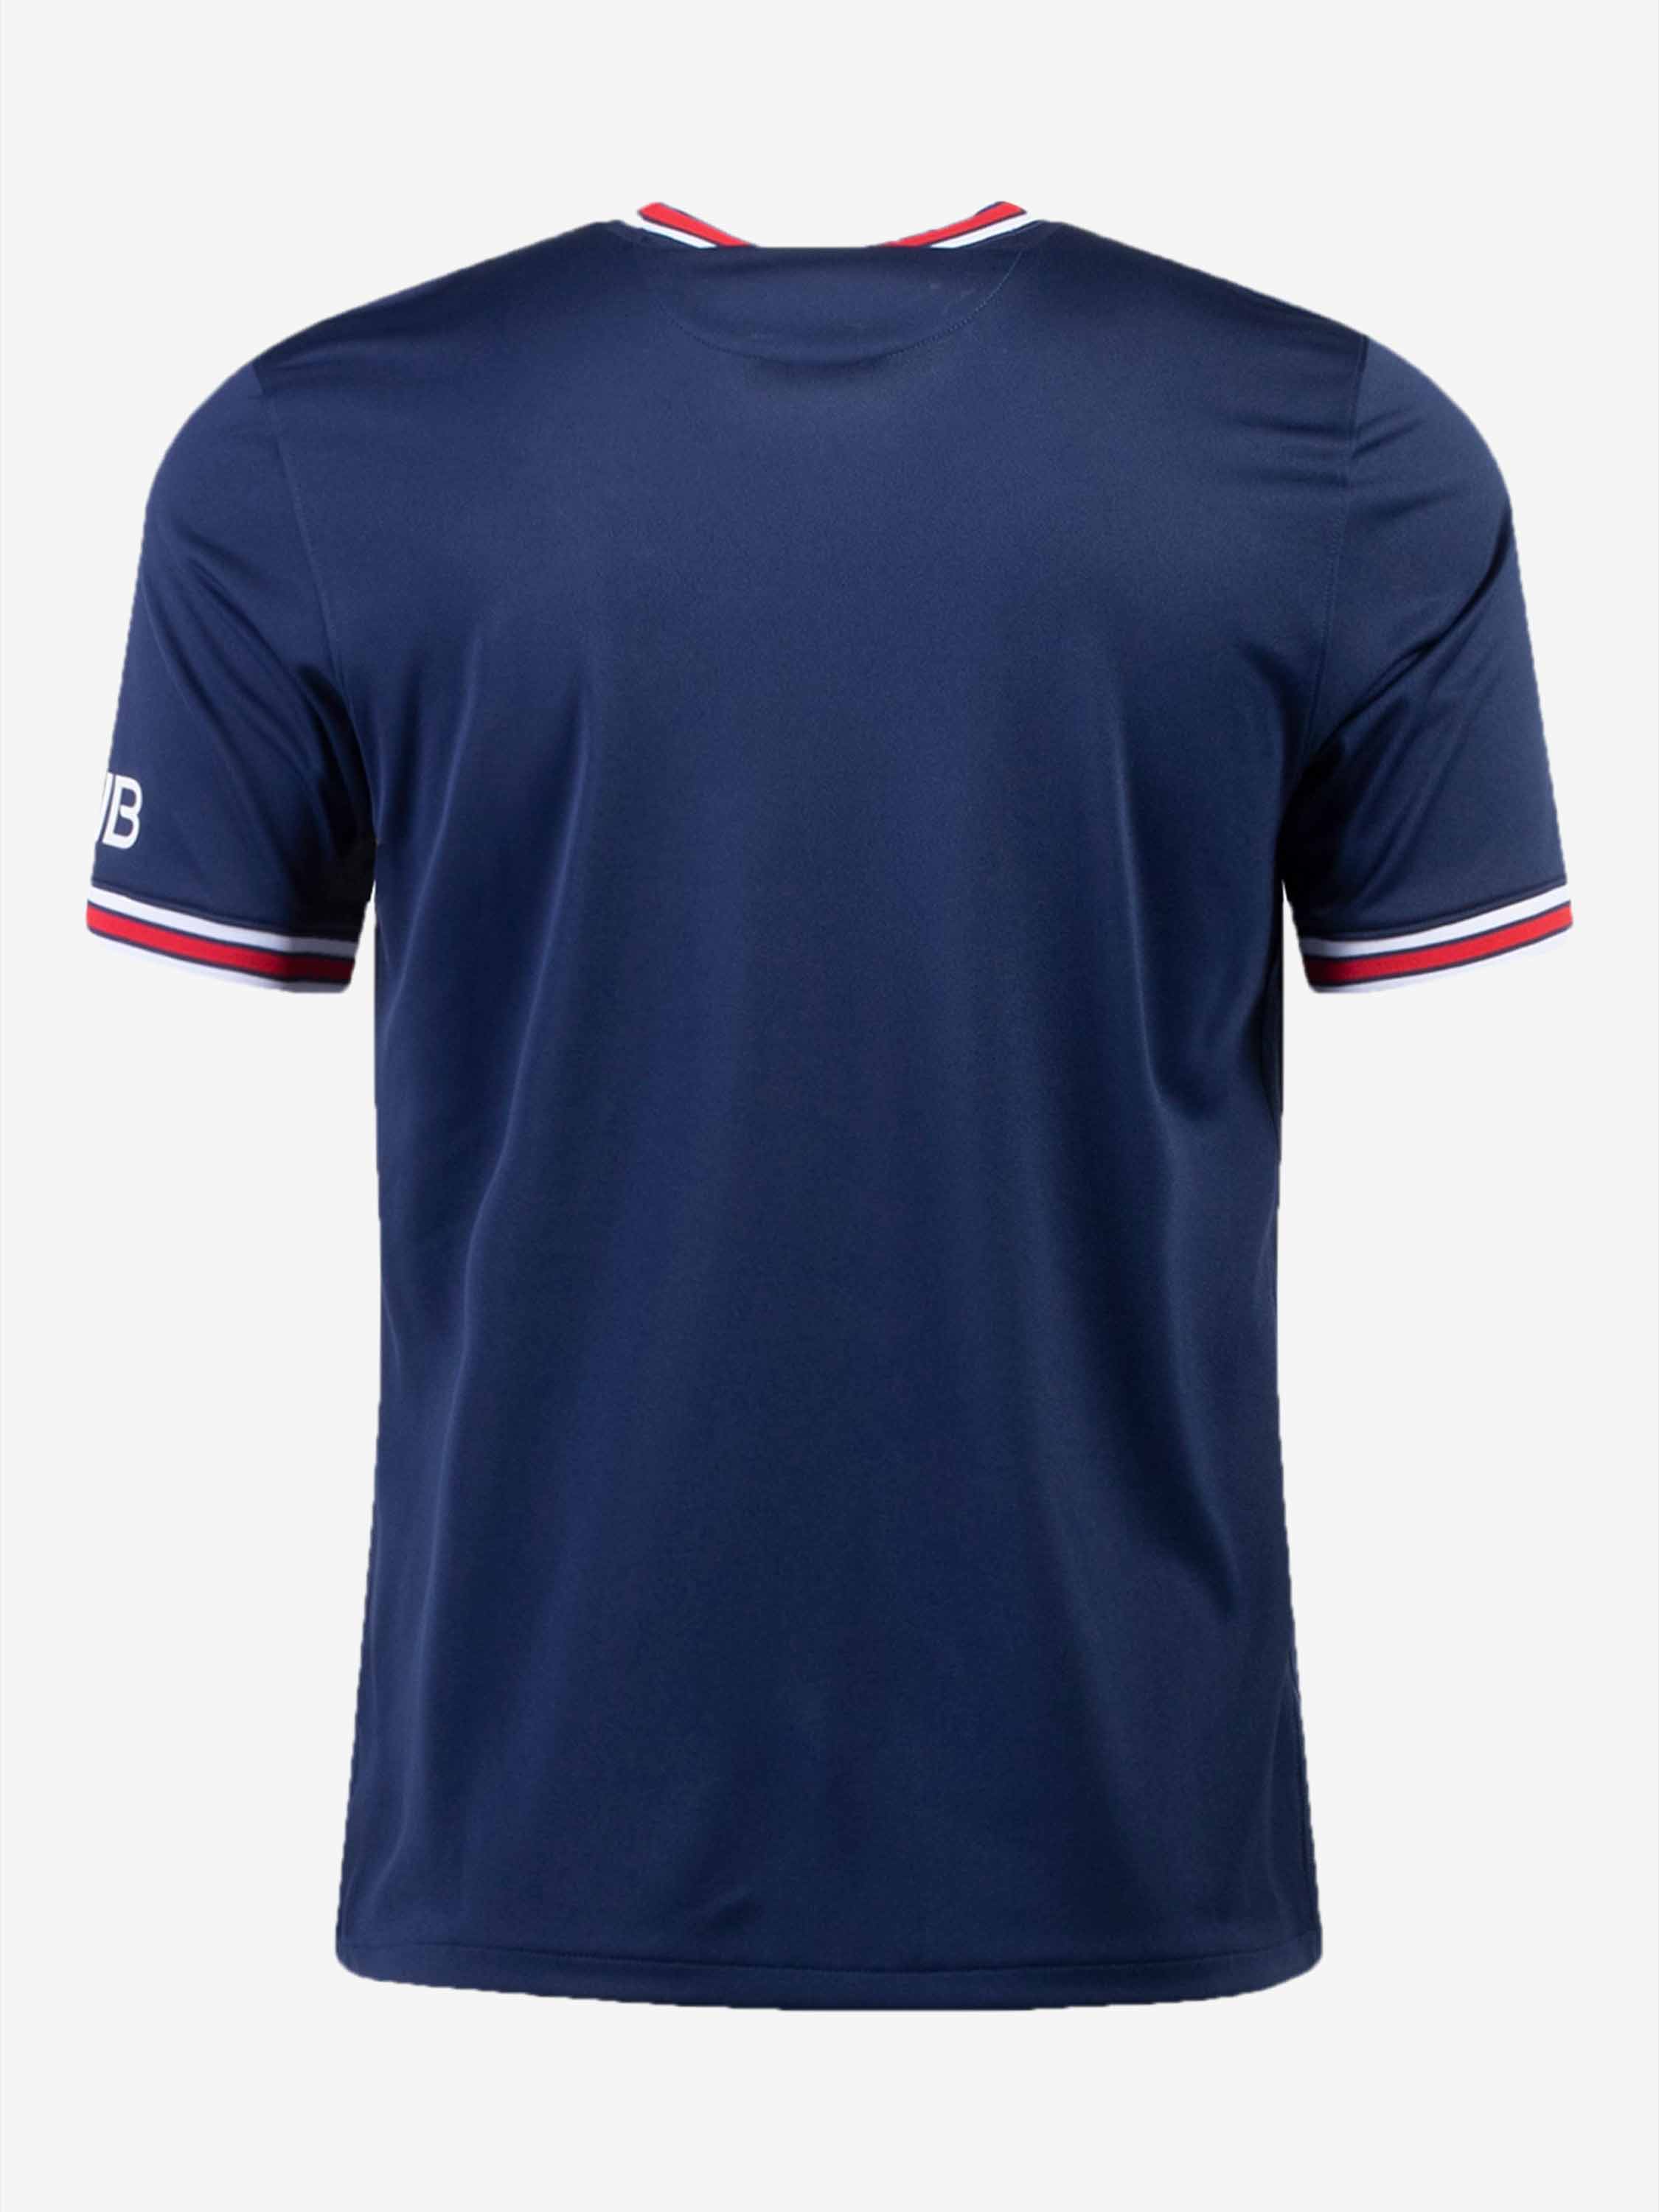 PSG Home Jersey 21 22 Season Premium Quality Buy Online In India.